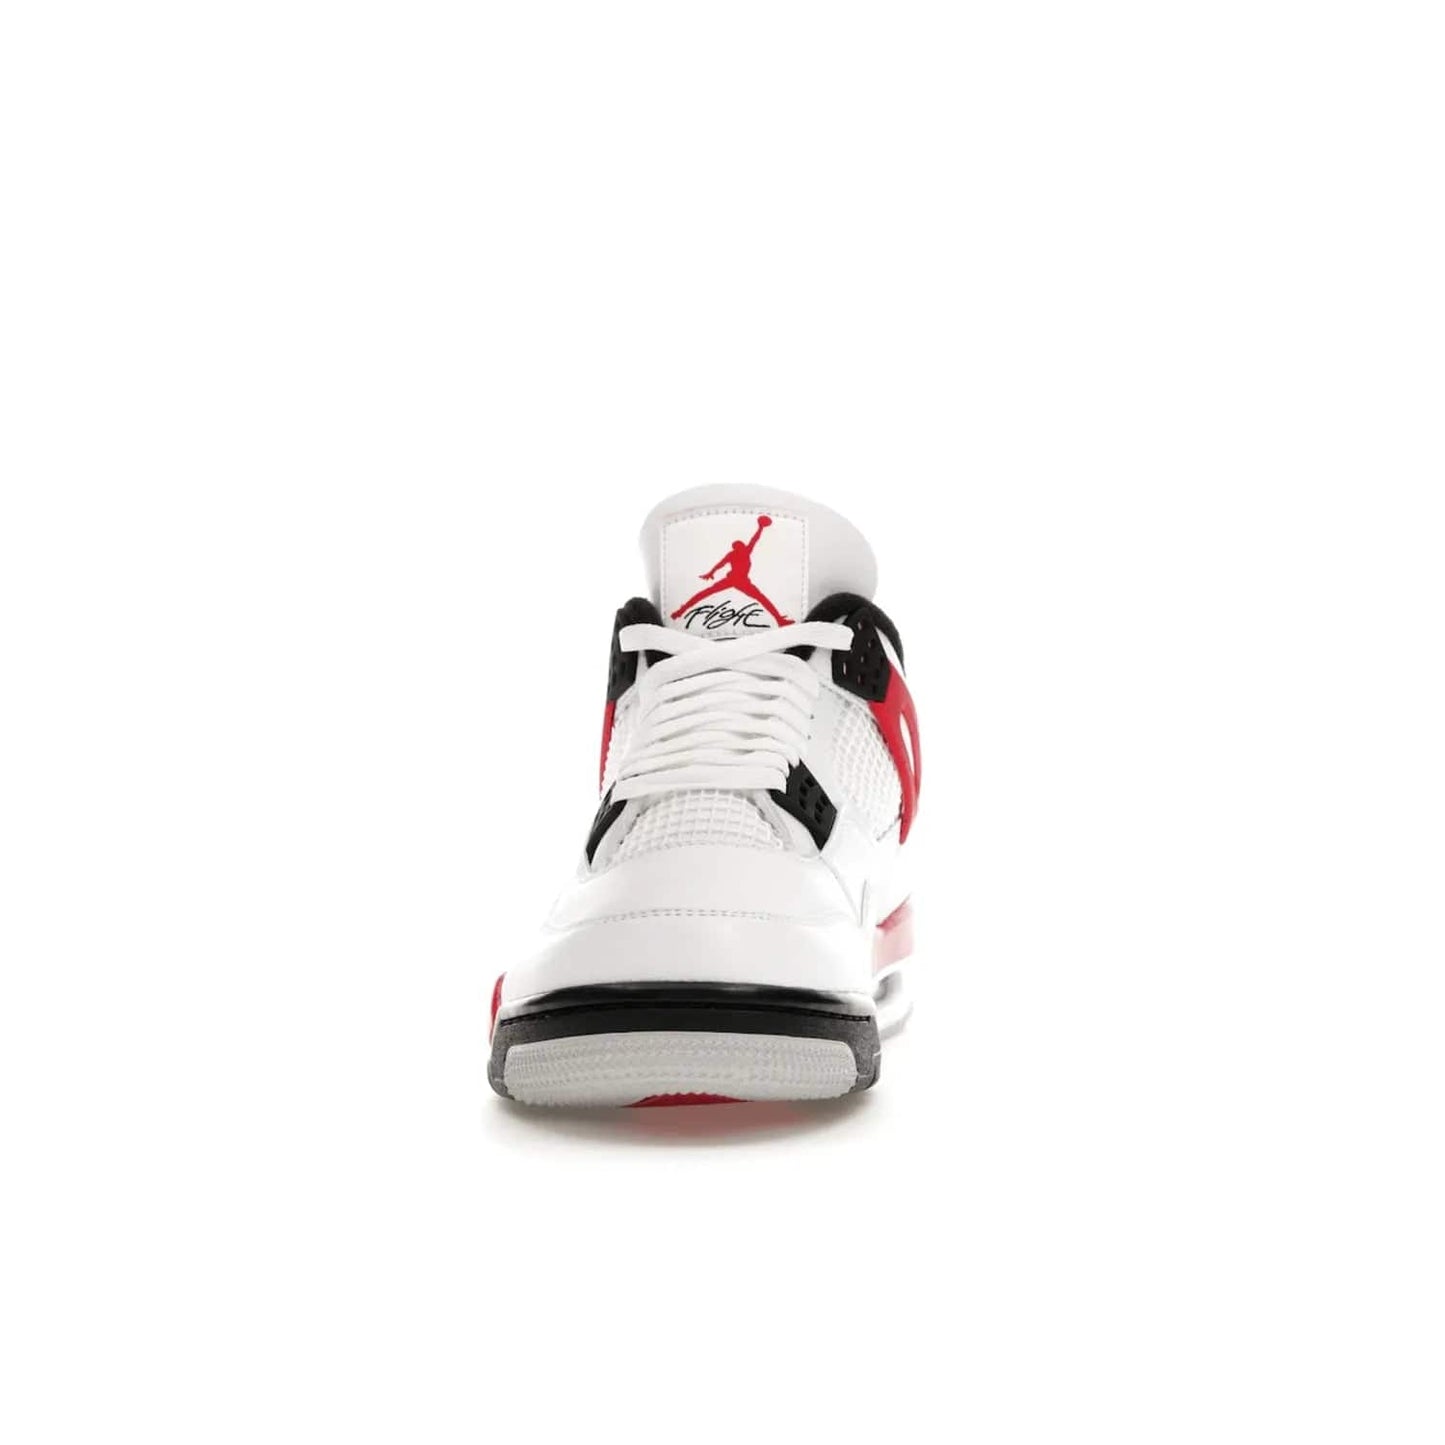 Jordan 4 Retro Red Cement - Image 11 - Only at www.BallersClubKickz.com - Iconic Jordan silhouette with a unique twist. White premium leather uppers with fire red and black detailing. Black, white, and fire red midsole with mesh detailing and Jumpman logo. Jordan 4 Retro Red Cement released with premium price.